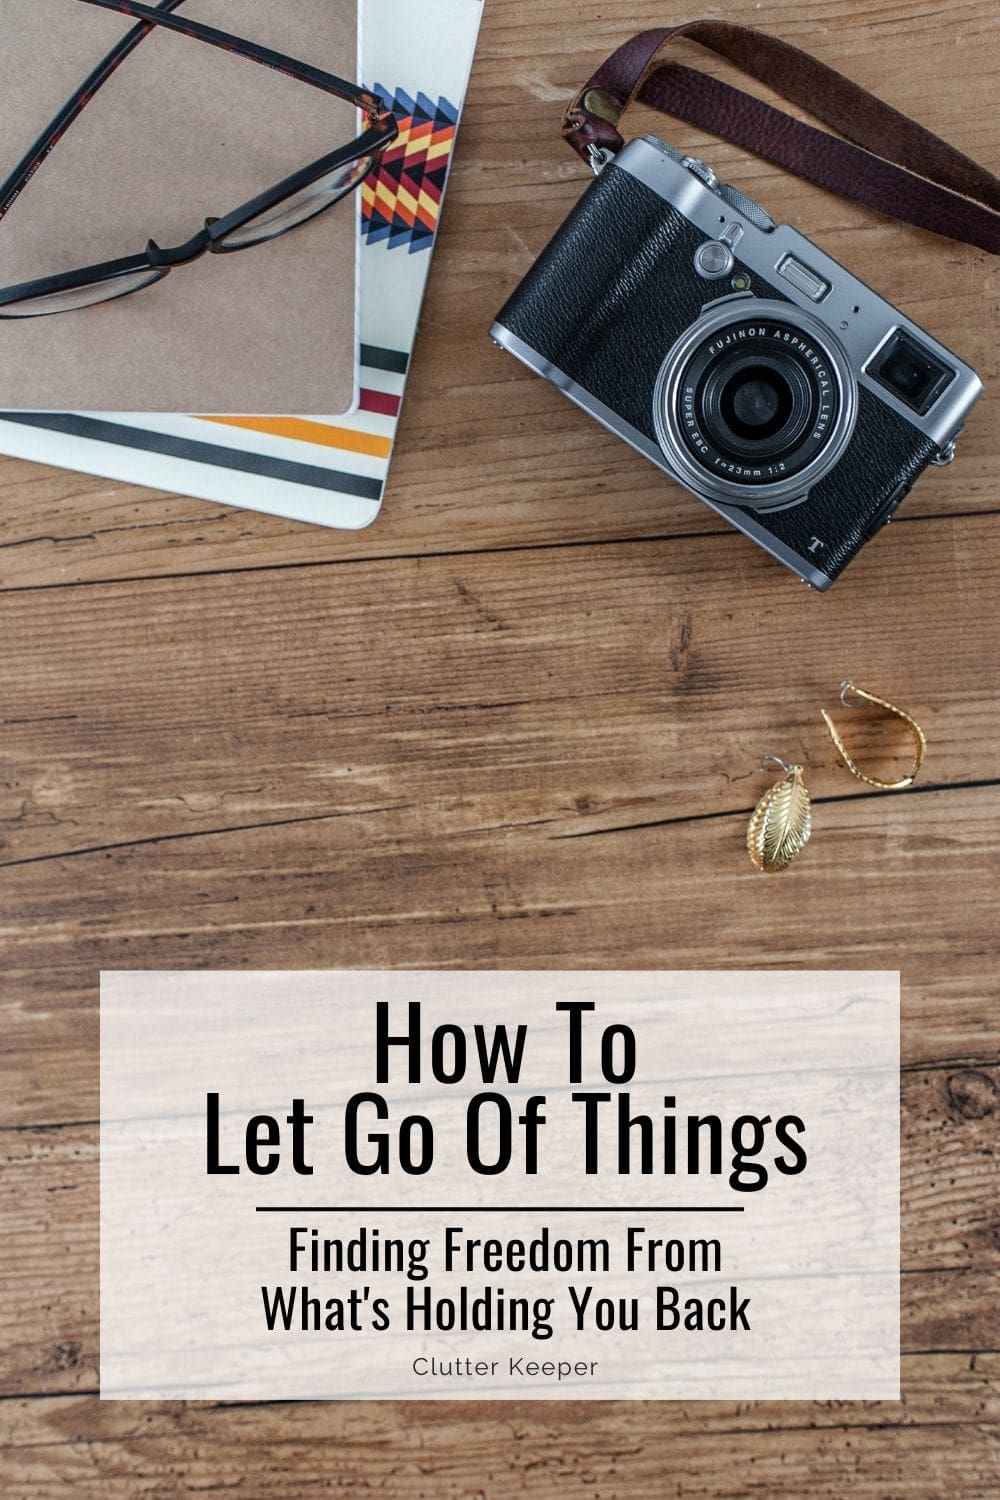 How to let go of things: Finding freedom from what's holding you back.